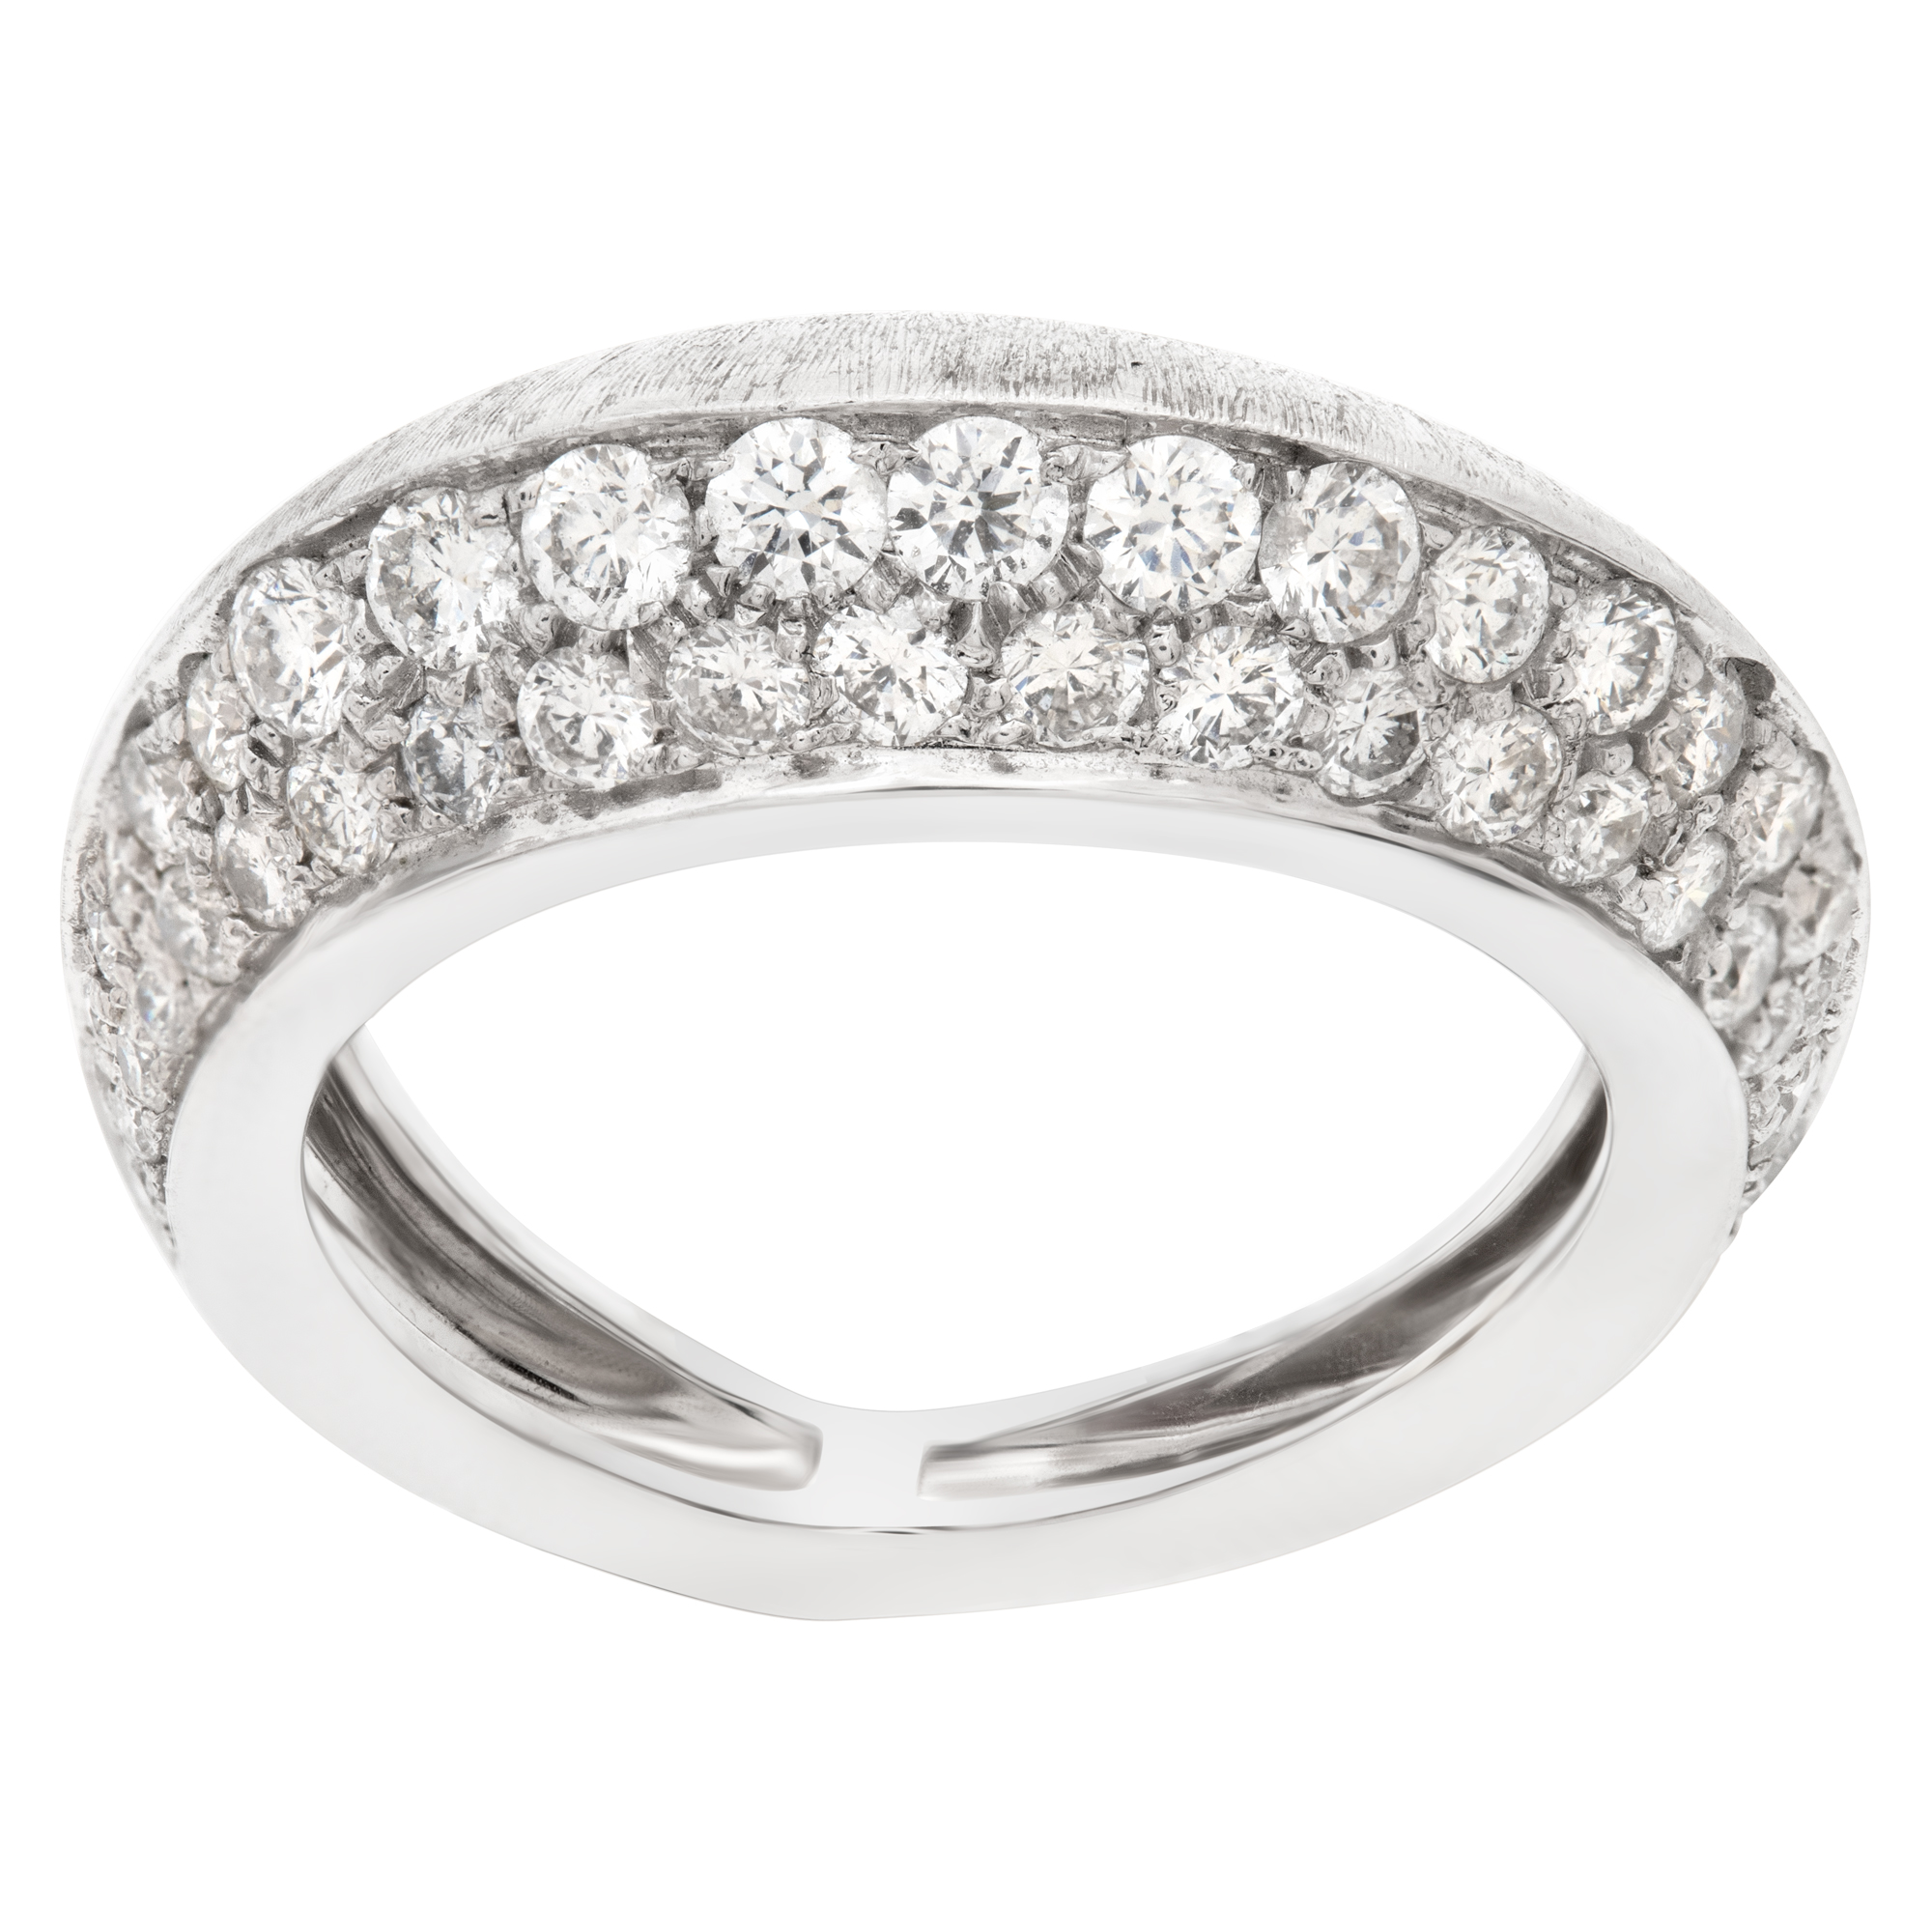 Domed diamond ring in 18k matte white gold. 1.00 carats in diamonds. Size 6